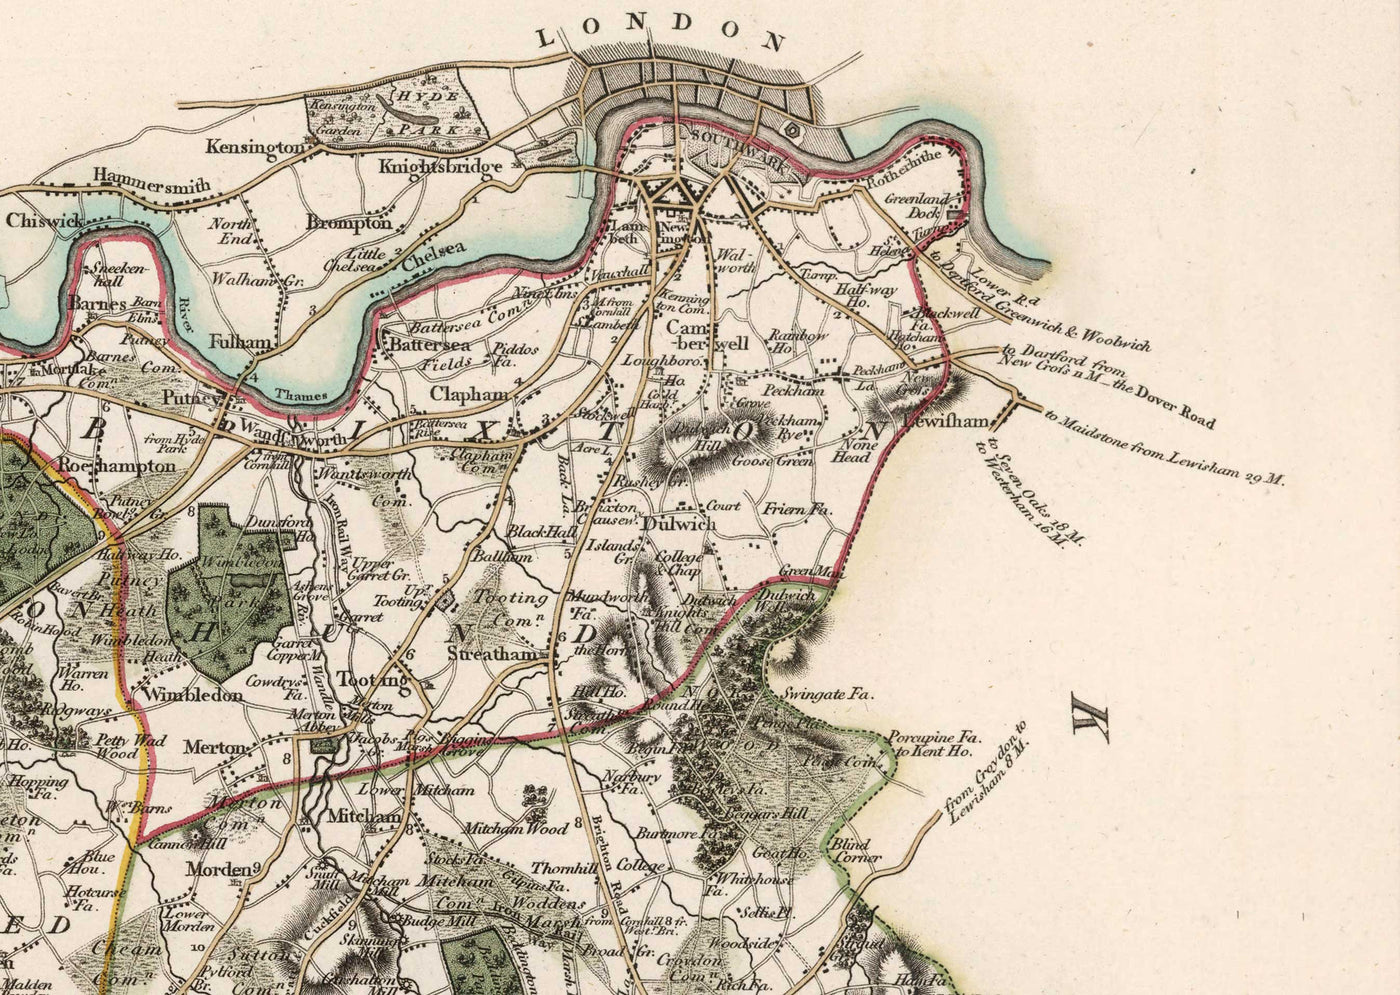 Old Map of Surrey in 1801 by John Cary - Guildford, Haslemere, Streatham, Reigate, Dorking